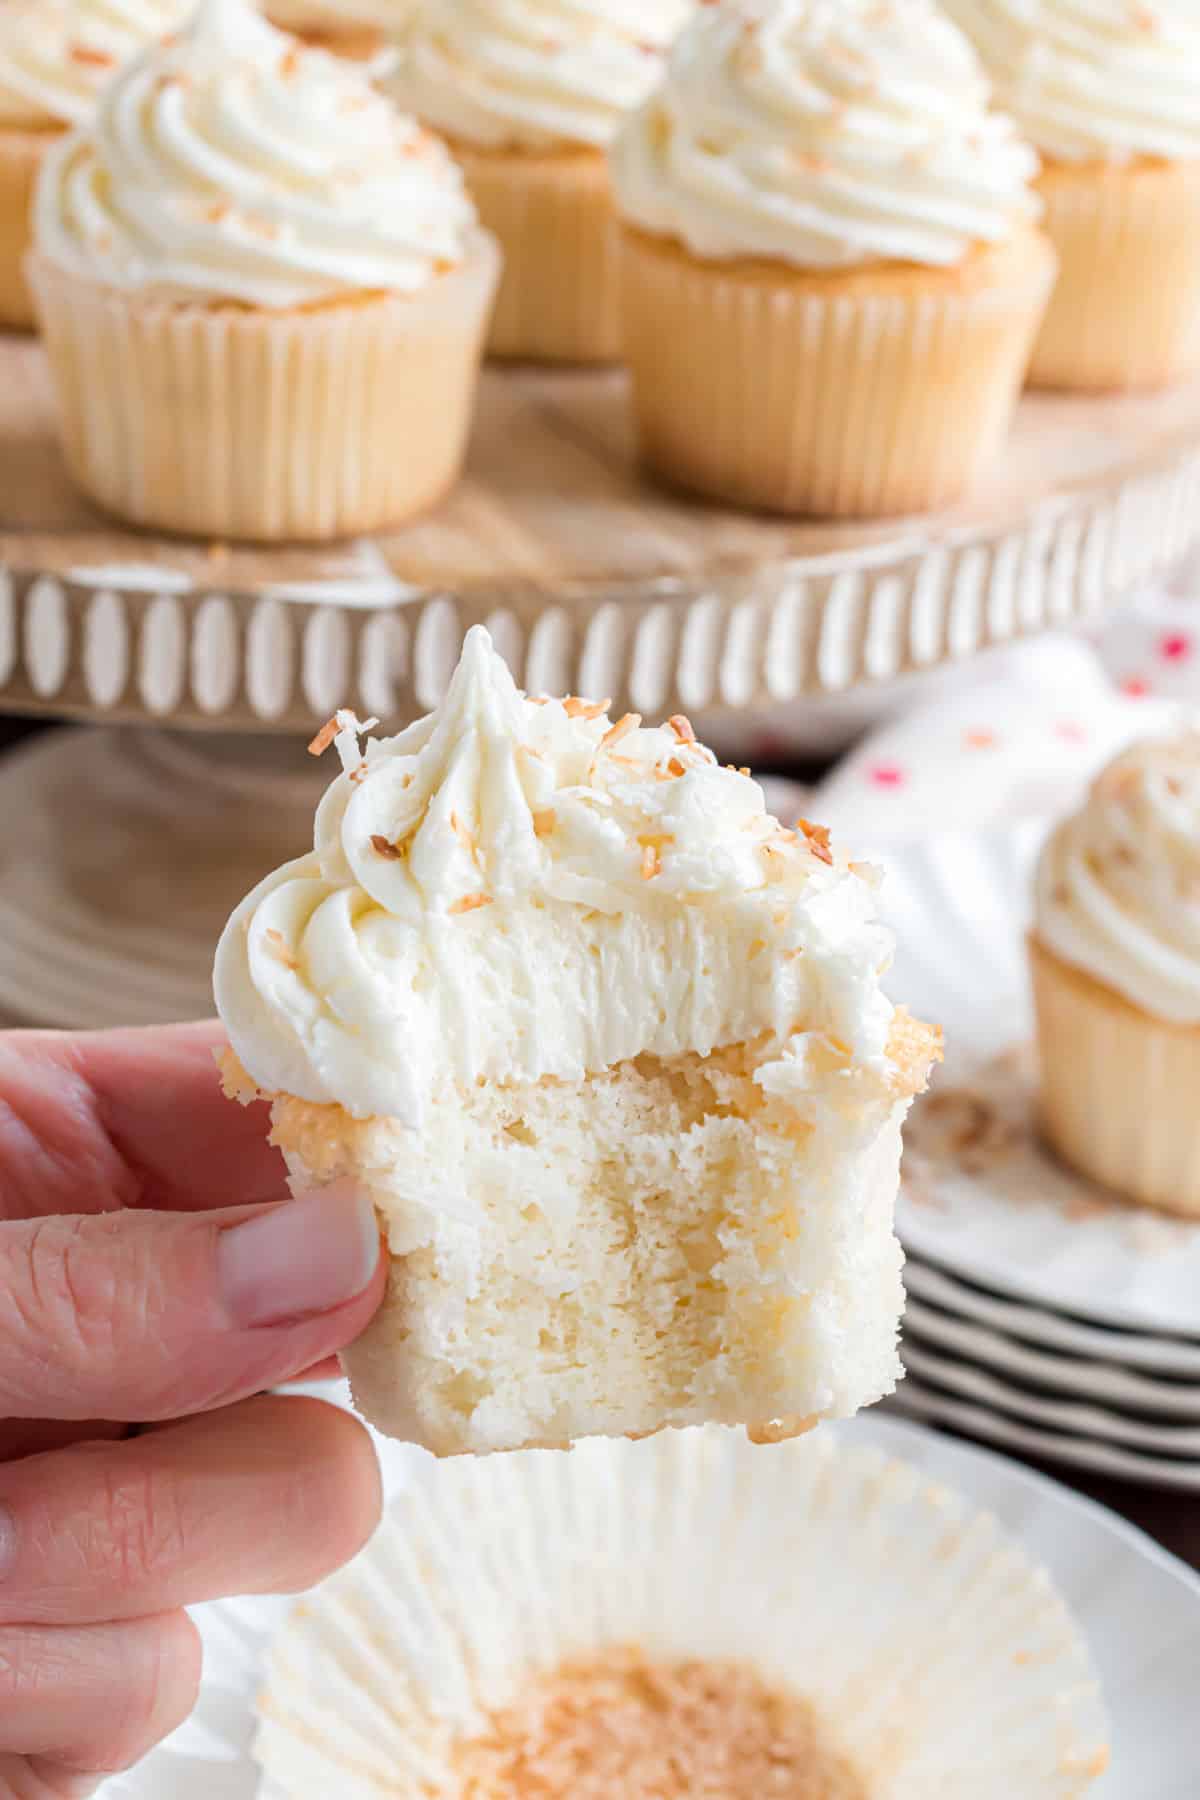 Coconut cupcake with a bite taken out.